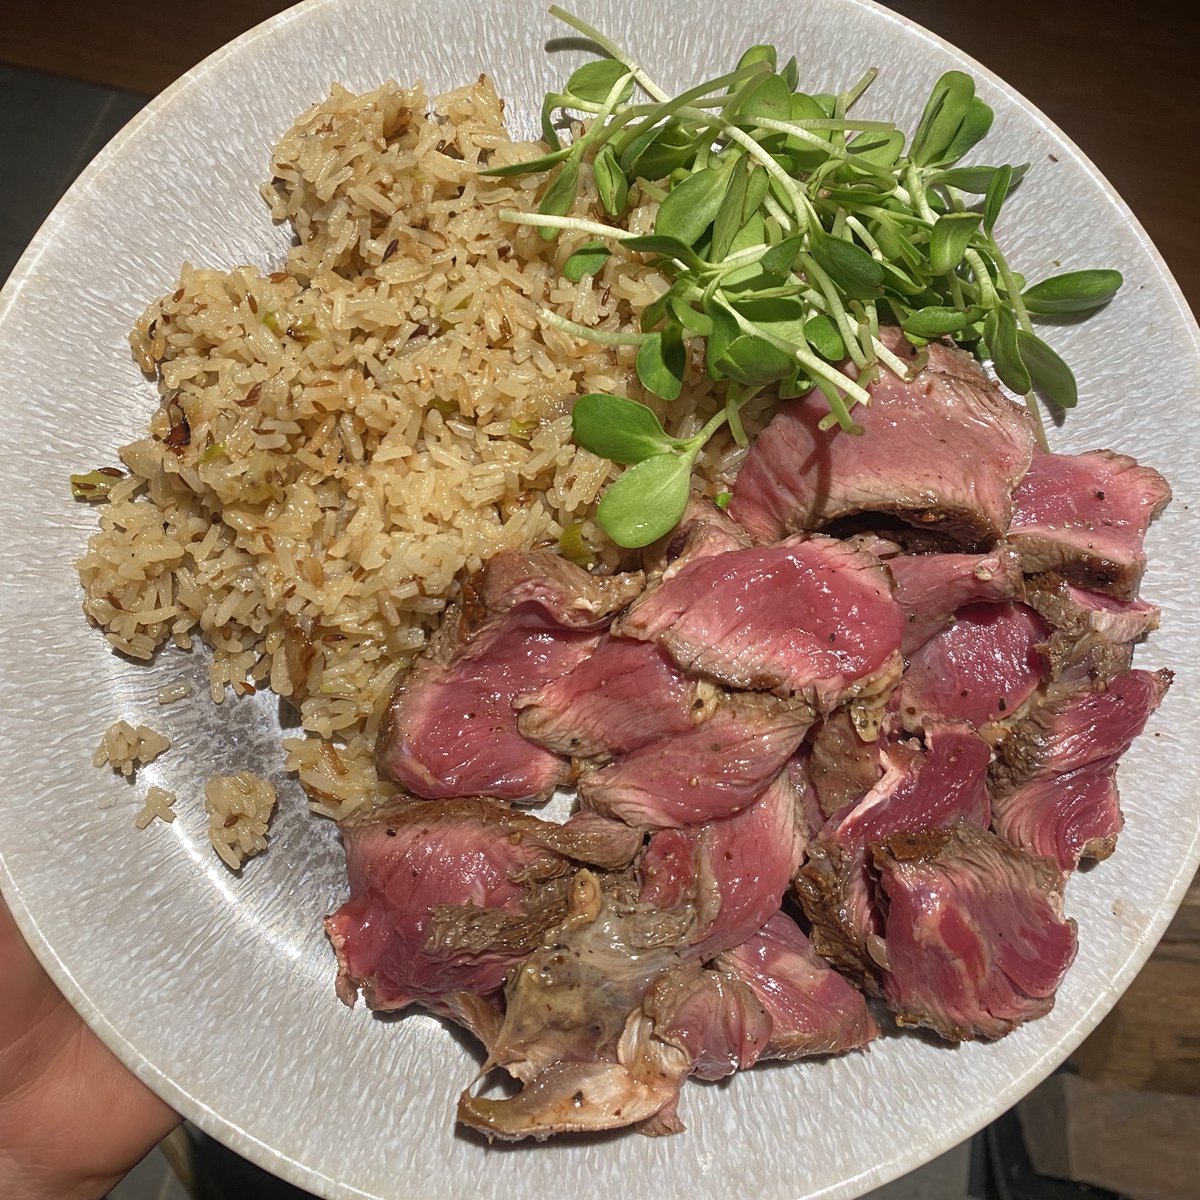 Dinner should not be compex, keep it simple. 

Find a nice protein source like this 350g ribeye ‘cooked’ to perfection,

Rice with some herbs and spices,

Organic sprouts,

Delicious, healthy and bioavailable.